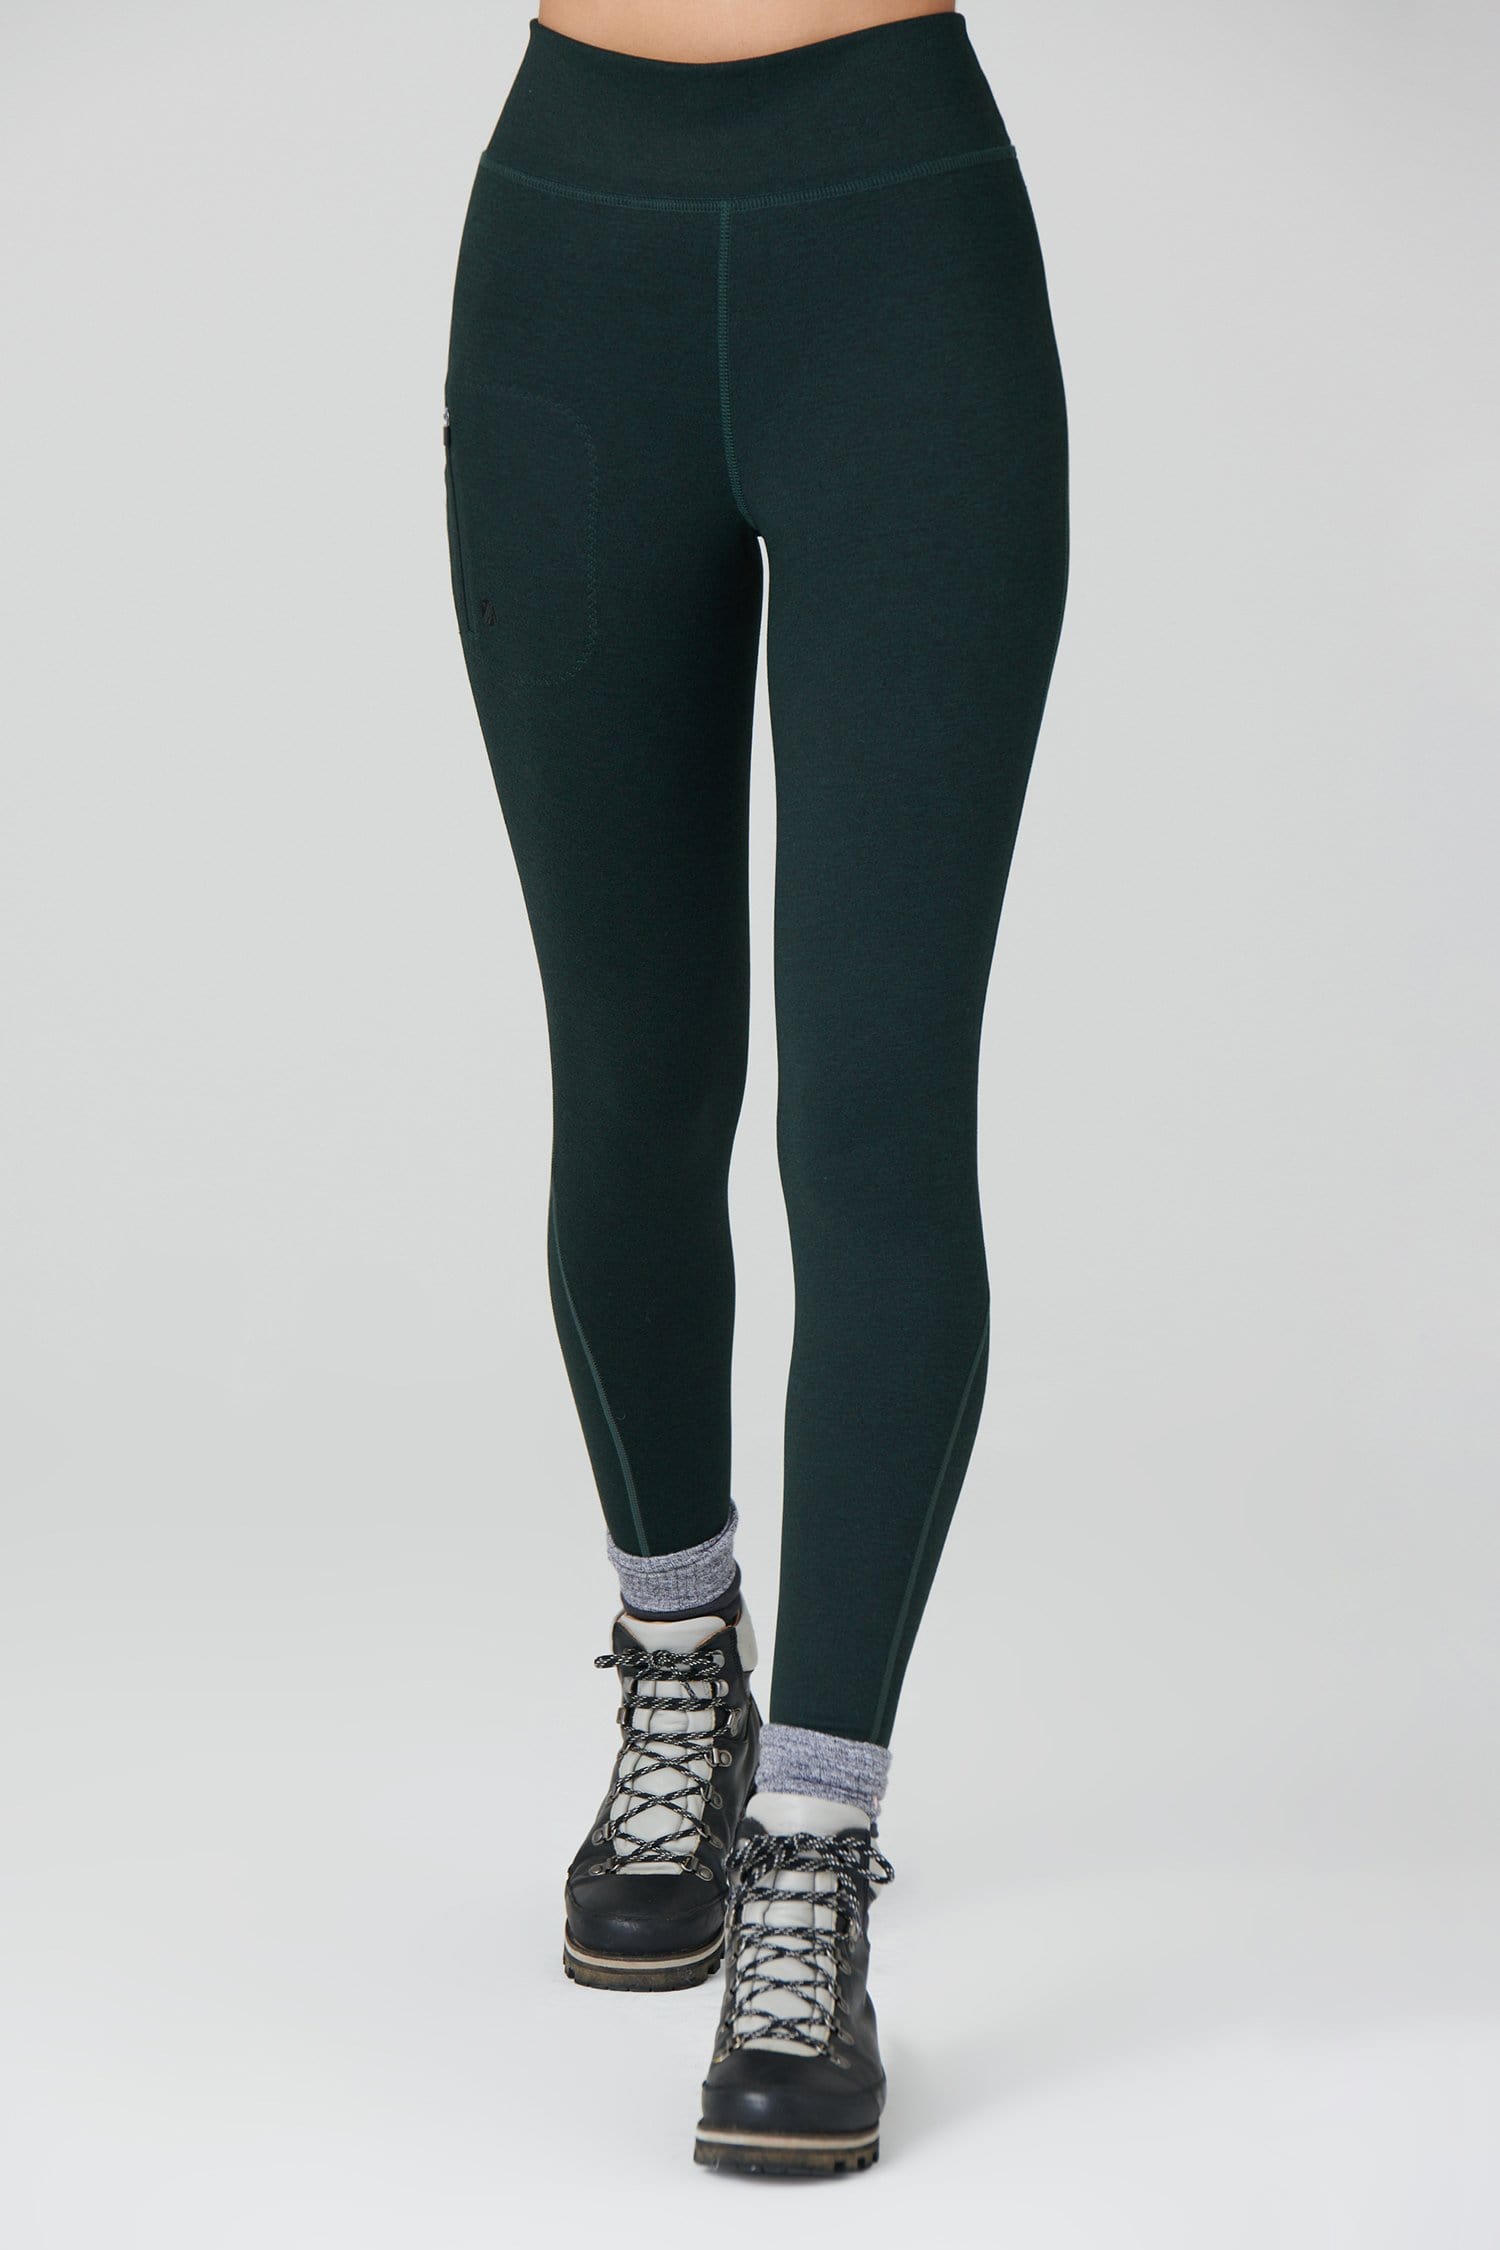 Thermal Outdoor Leggings - Forest Green - Large / Uk14 - Womens - Acai Outdoorwear